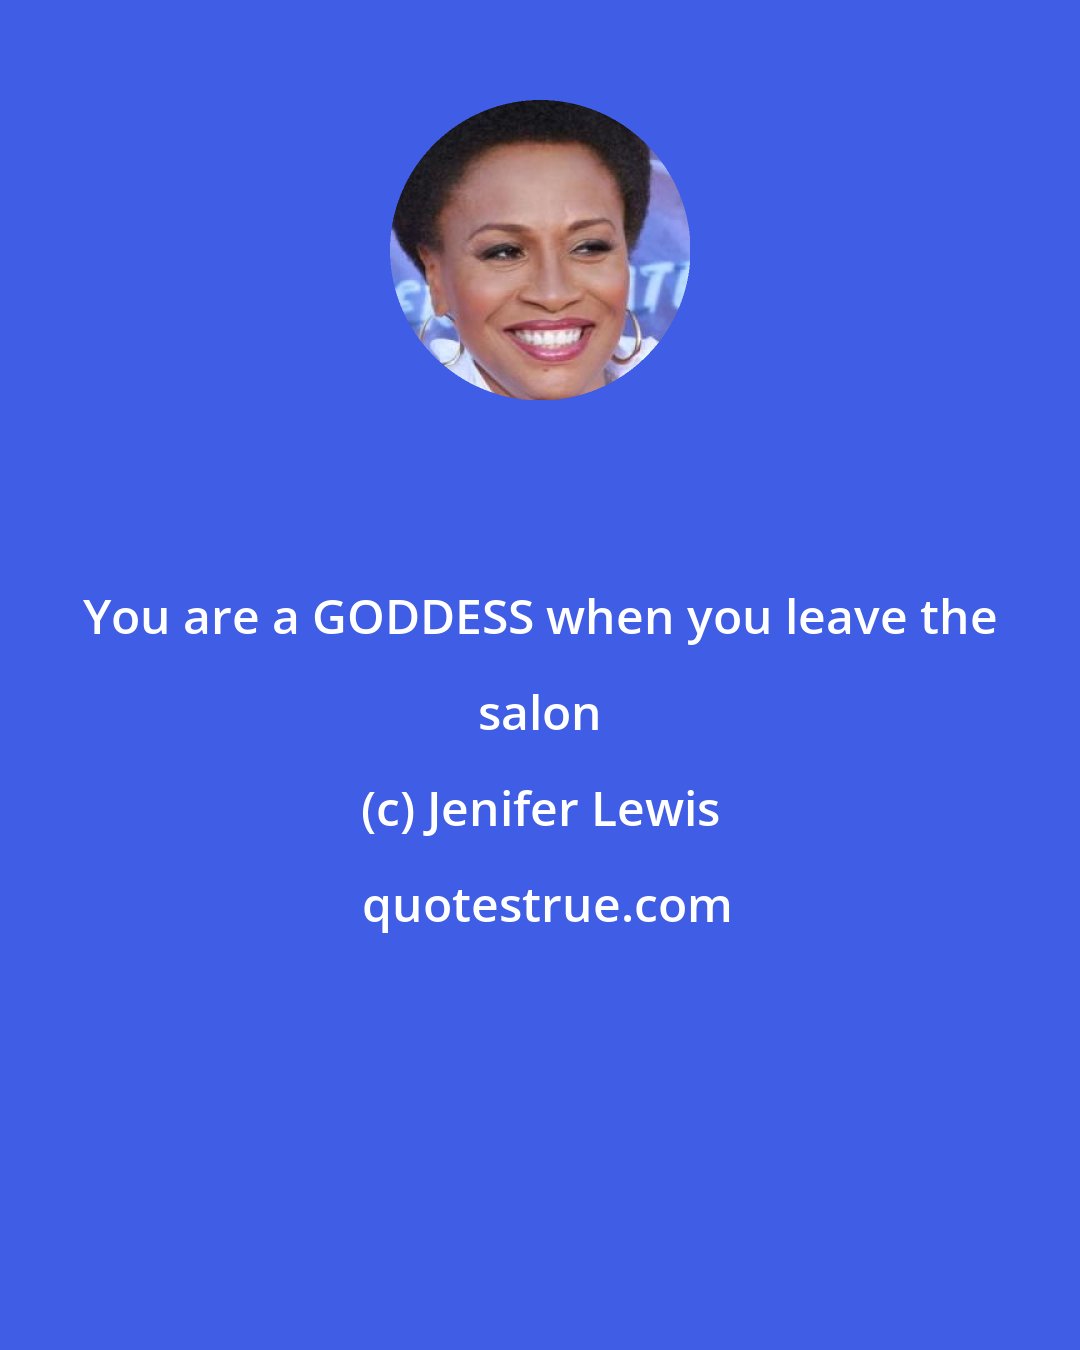 Jenifer Lewis: You are a GODDESS when you leave the salon